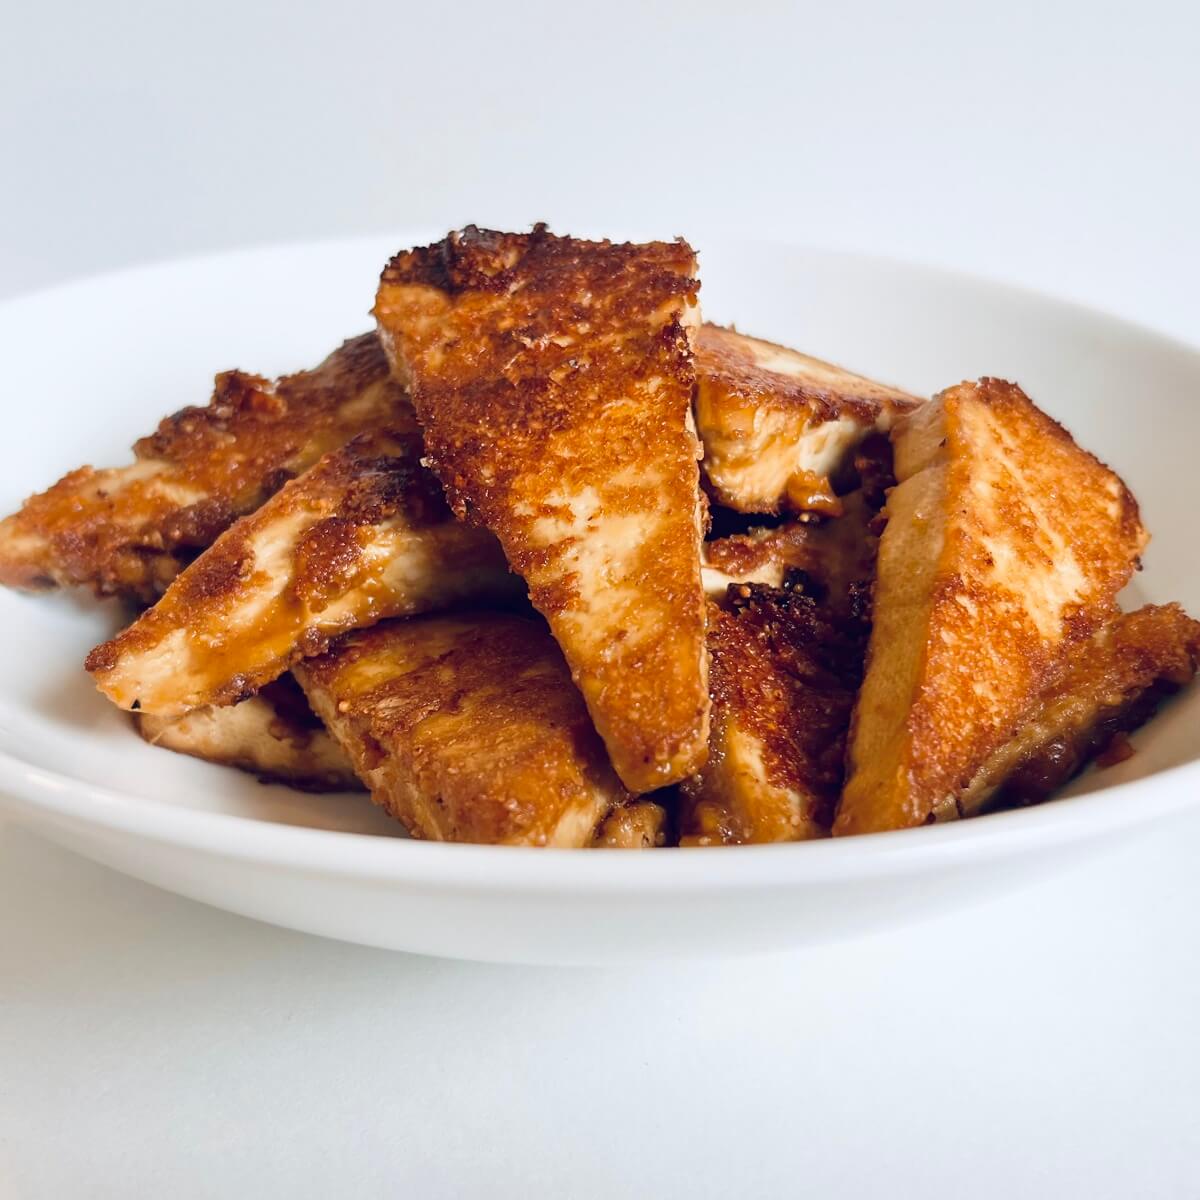 Triangular cut cooked tofu pieces in a bowl.